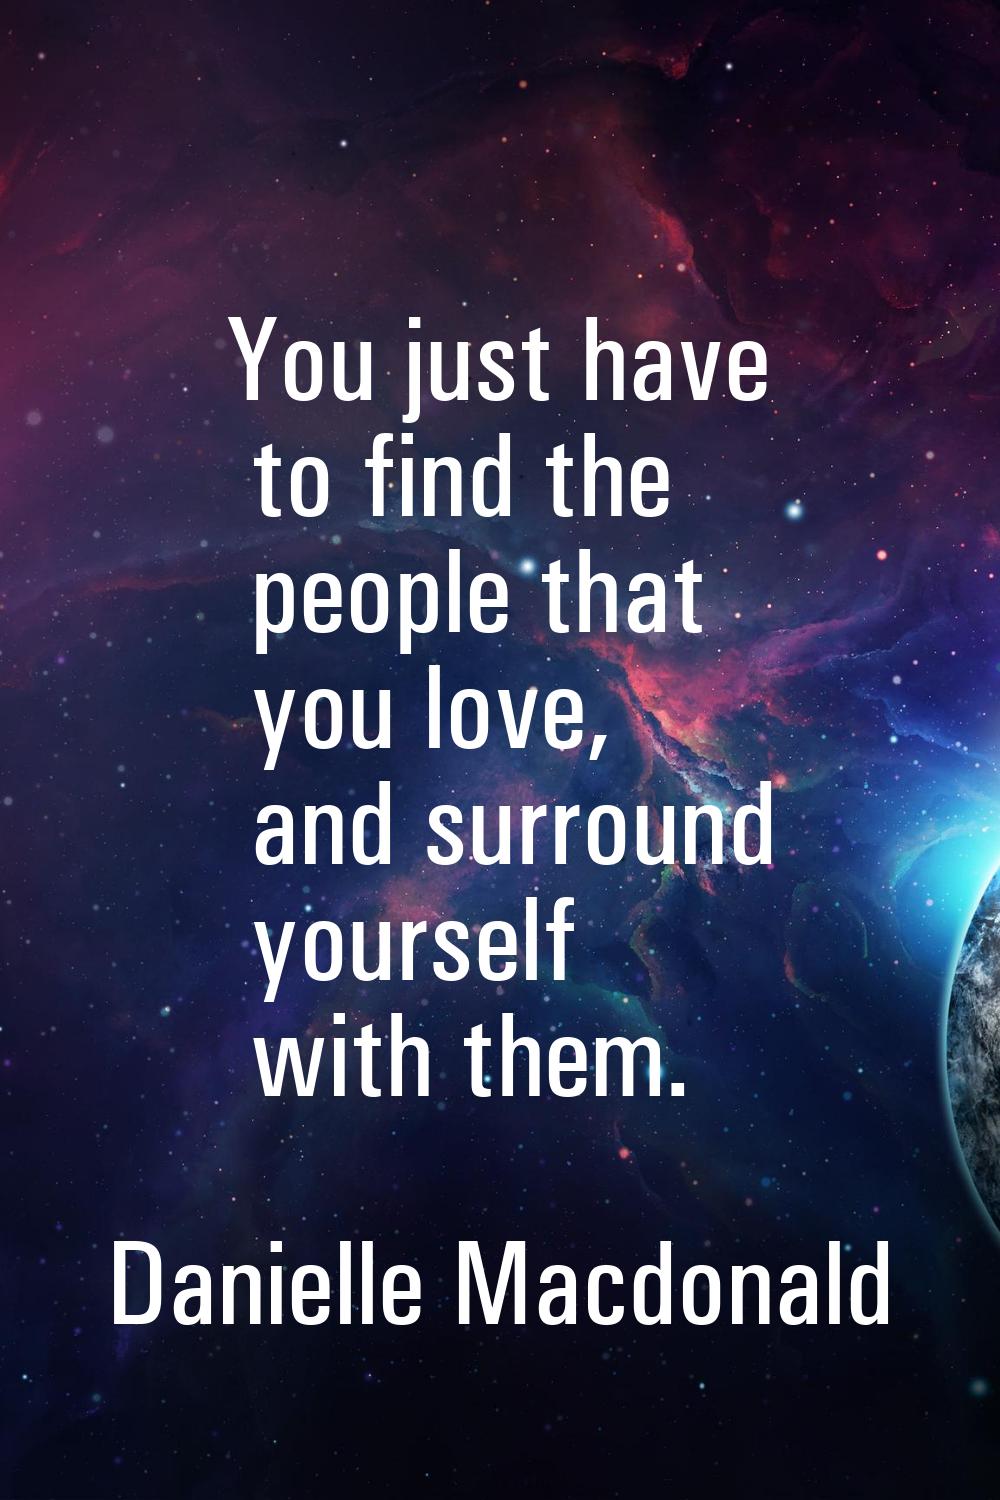 You just have to find the people that you love, and surround yourself with them.